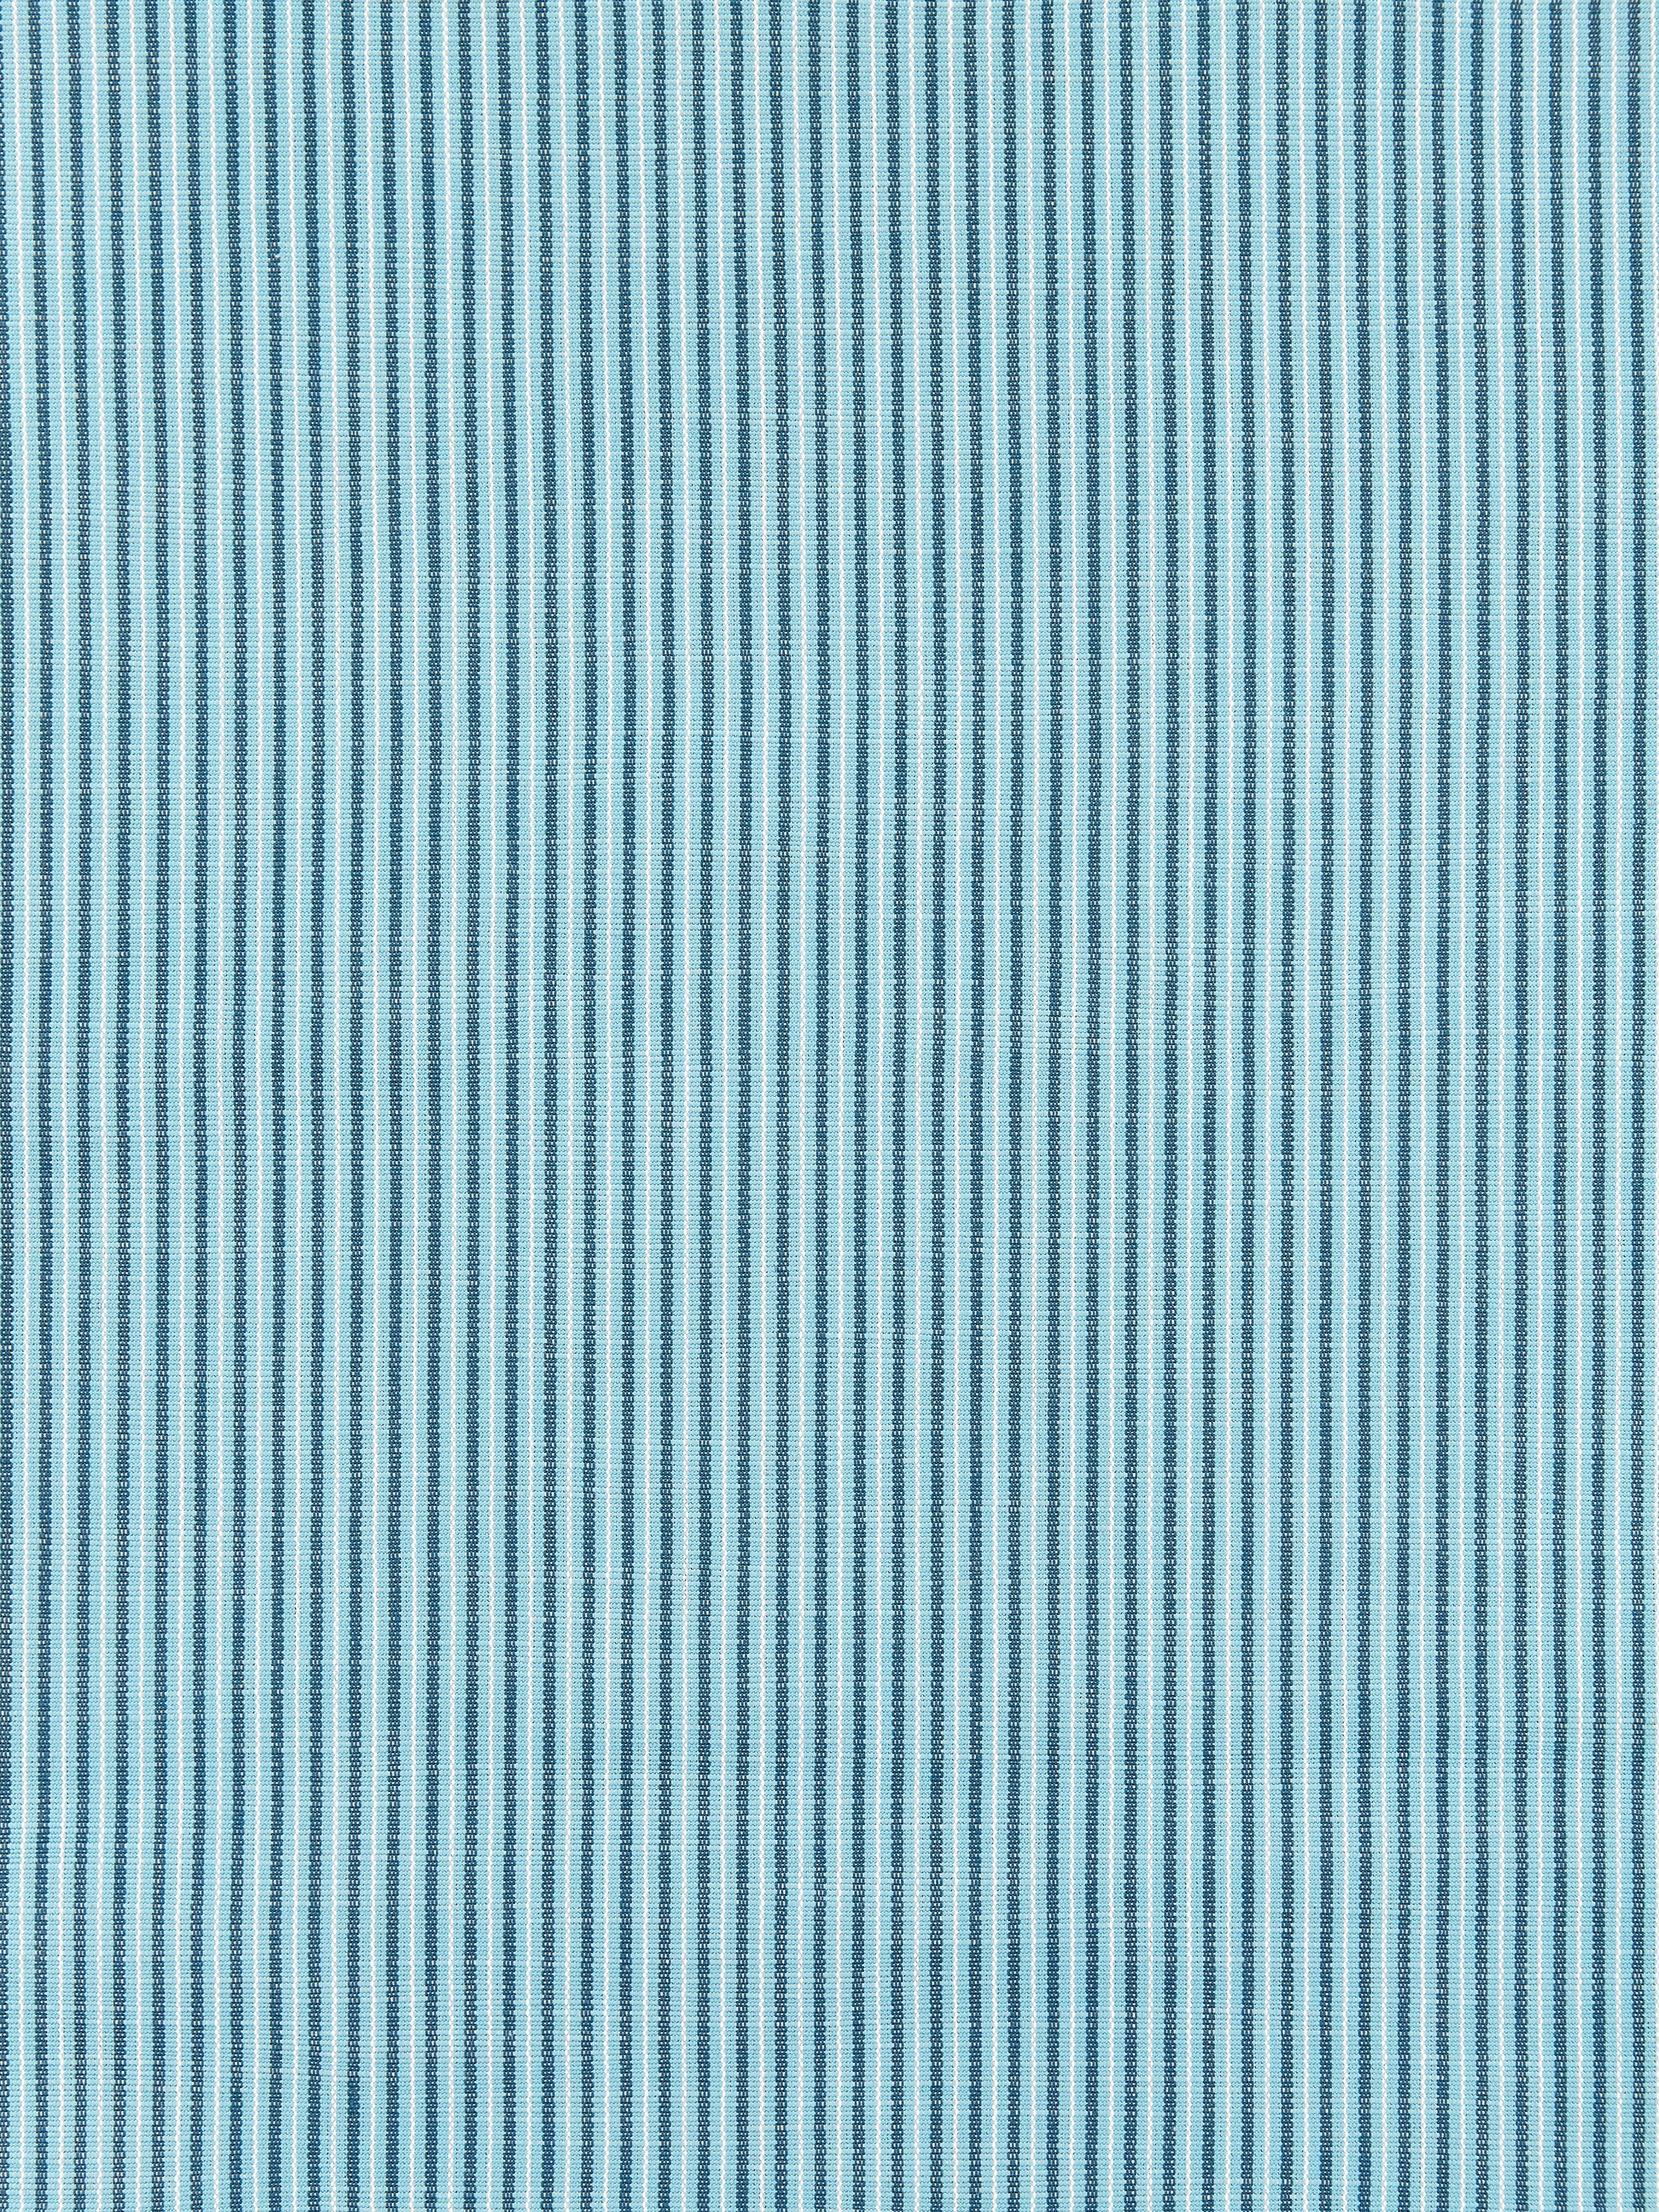 Tisbury Stripe fabric in azure color - pattern number SC 000227109 - by Scalamandre in the Scalamandre Fabrics Book 1 collection